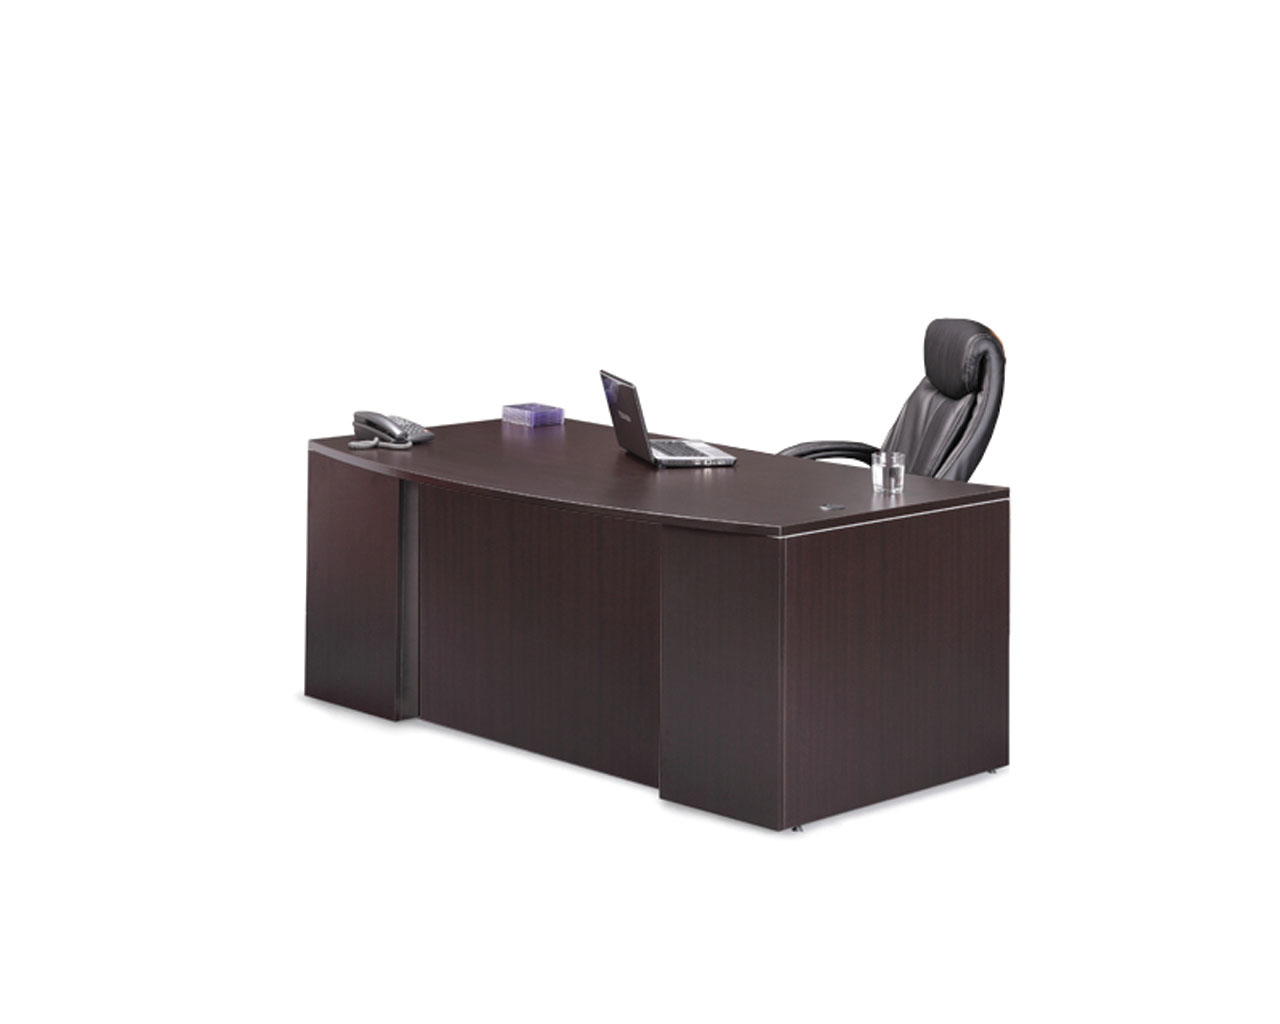 Necessary points to take into account before purchasing office furniture